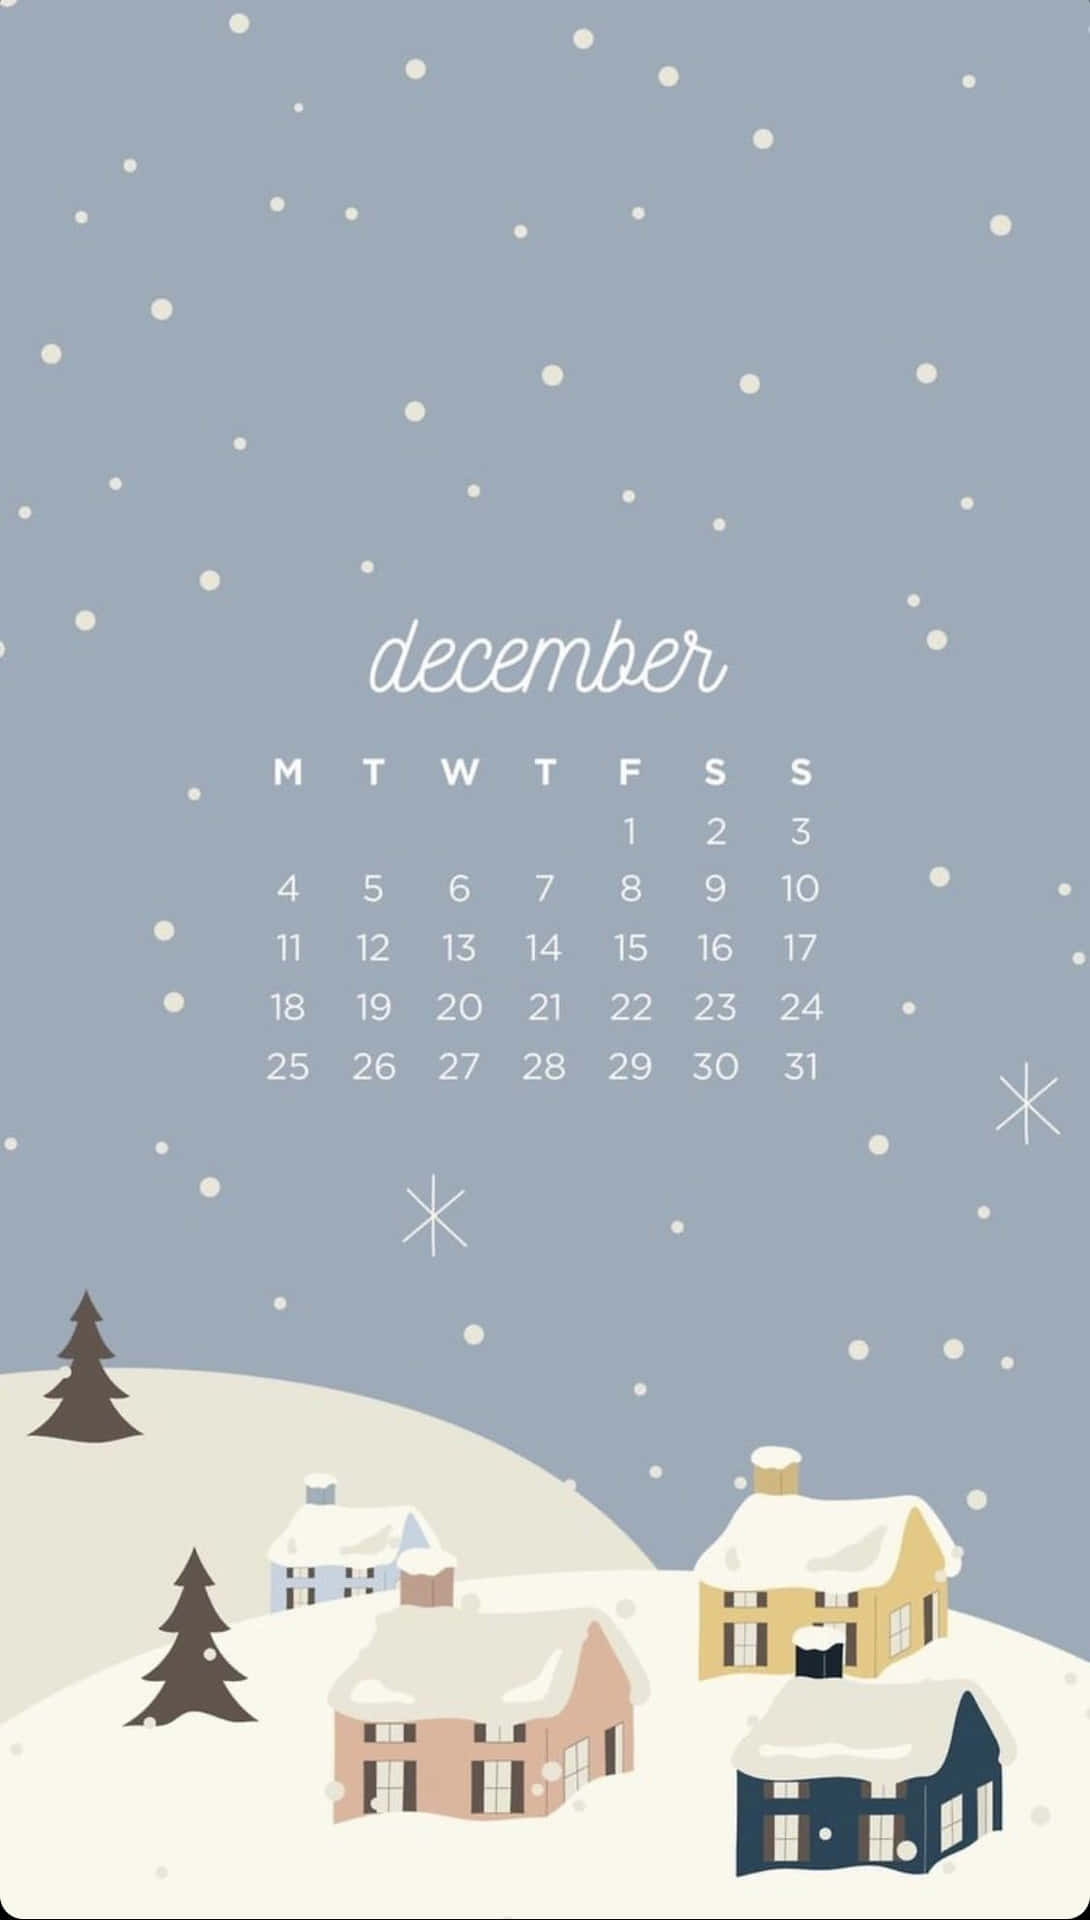 December brings out the warmth in us all. Wallpaper